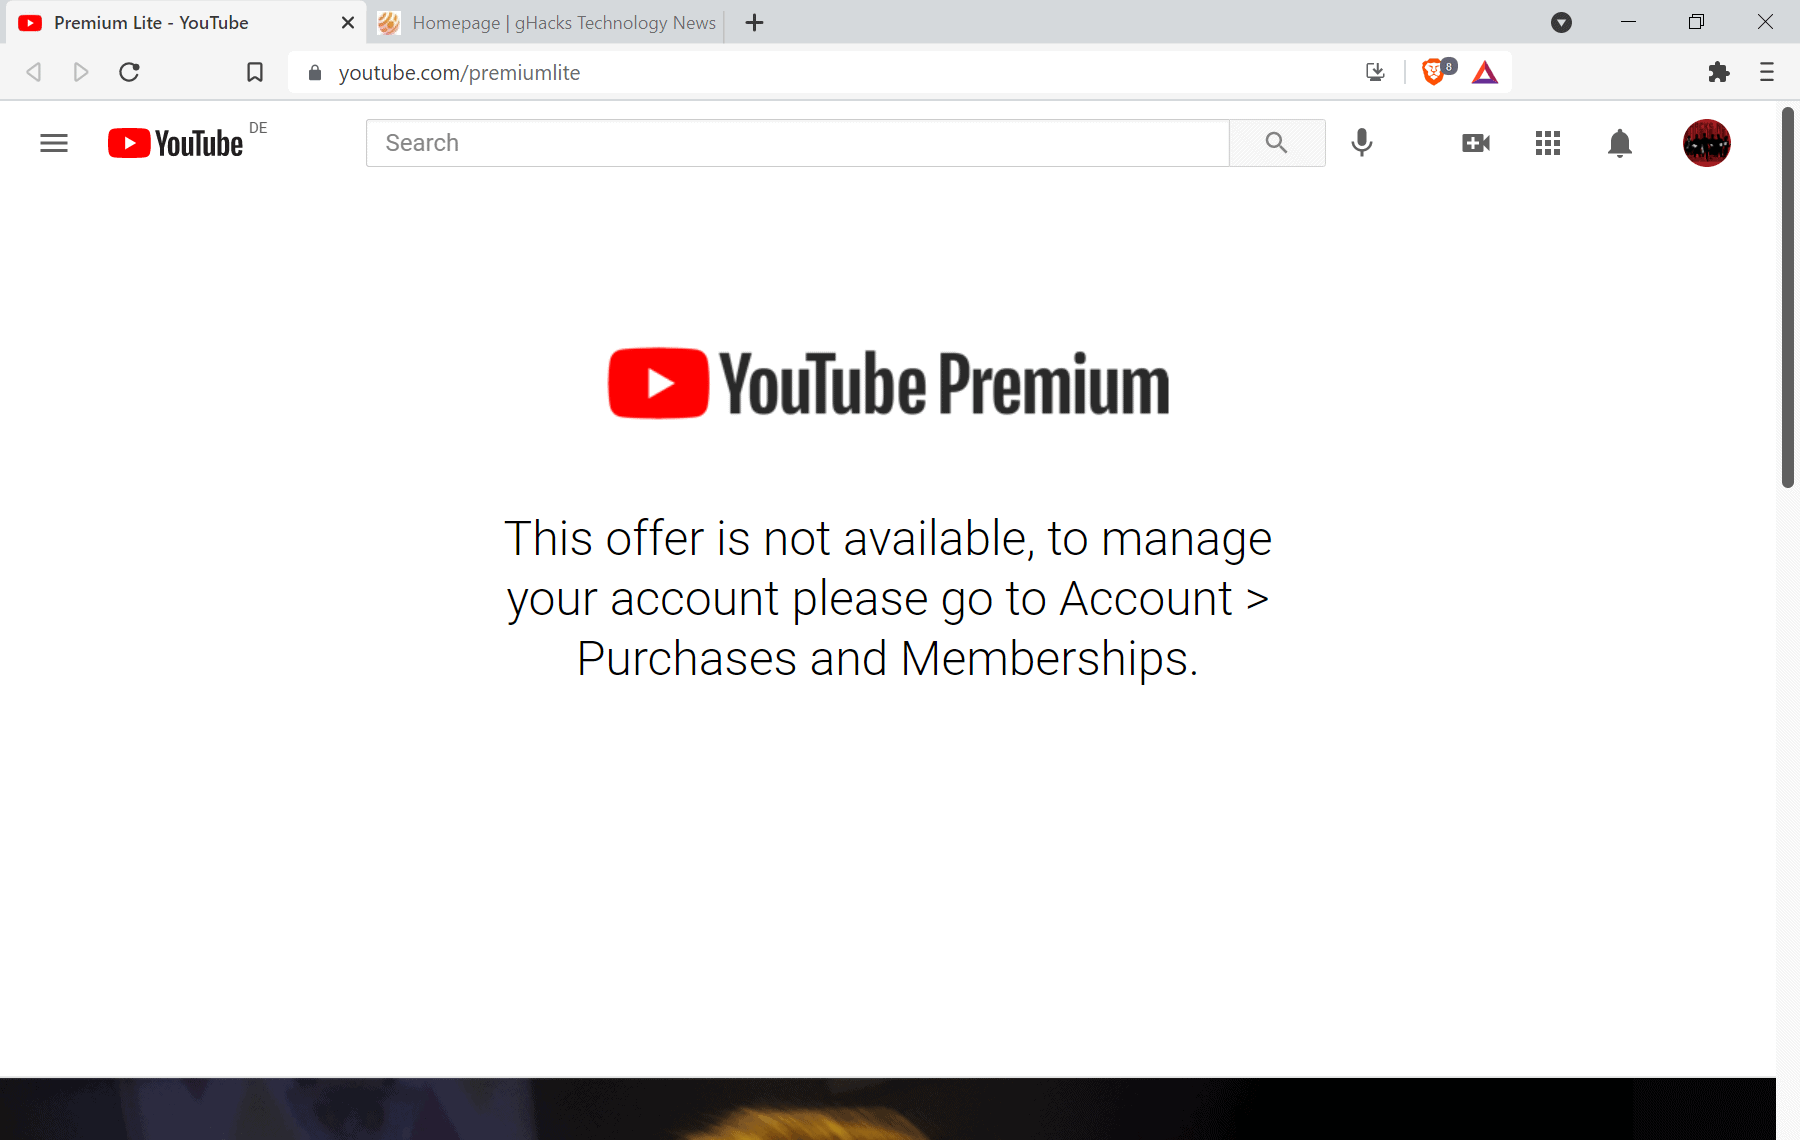 YouTube Premium Lite disables ads on YouTube for €6.99 per month